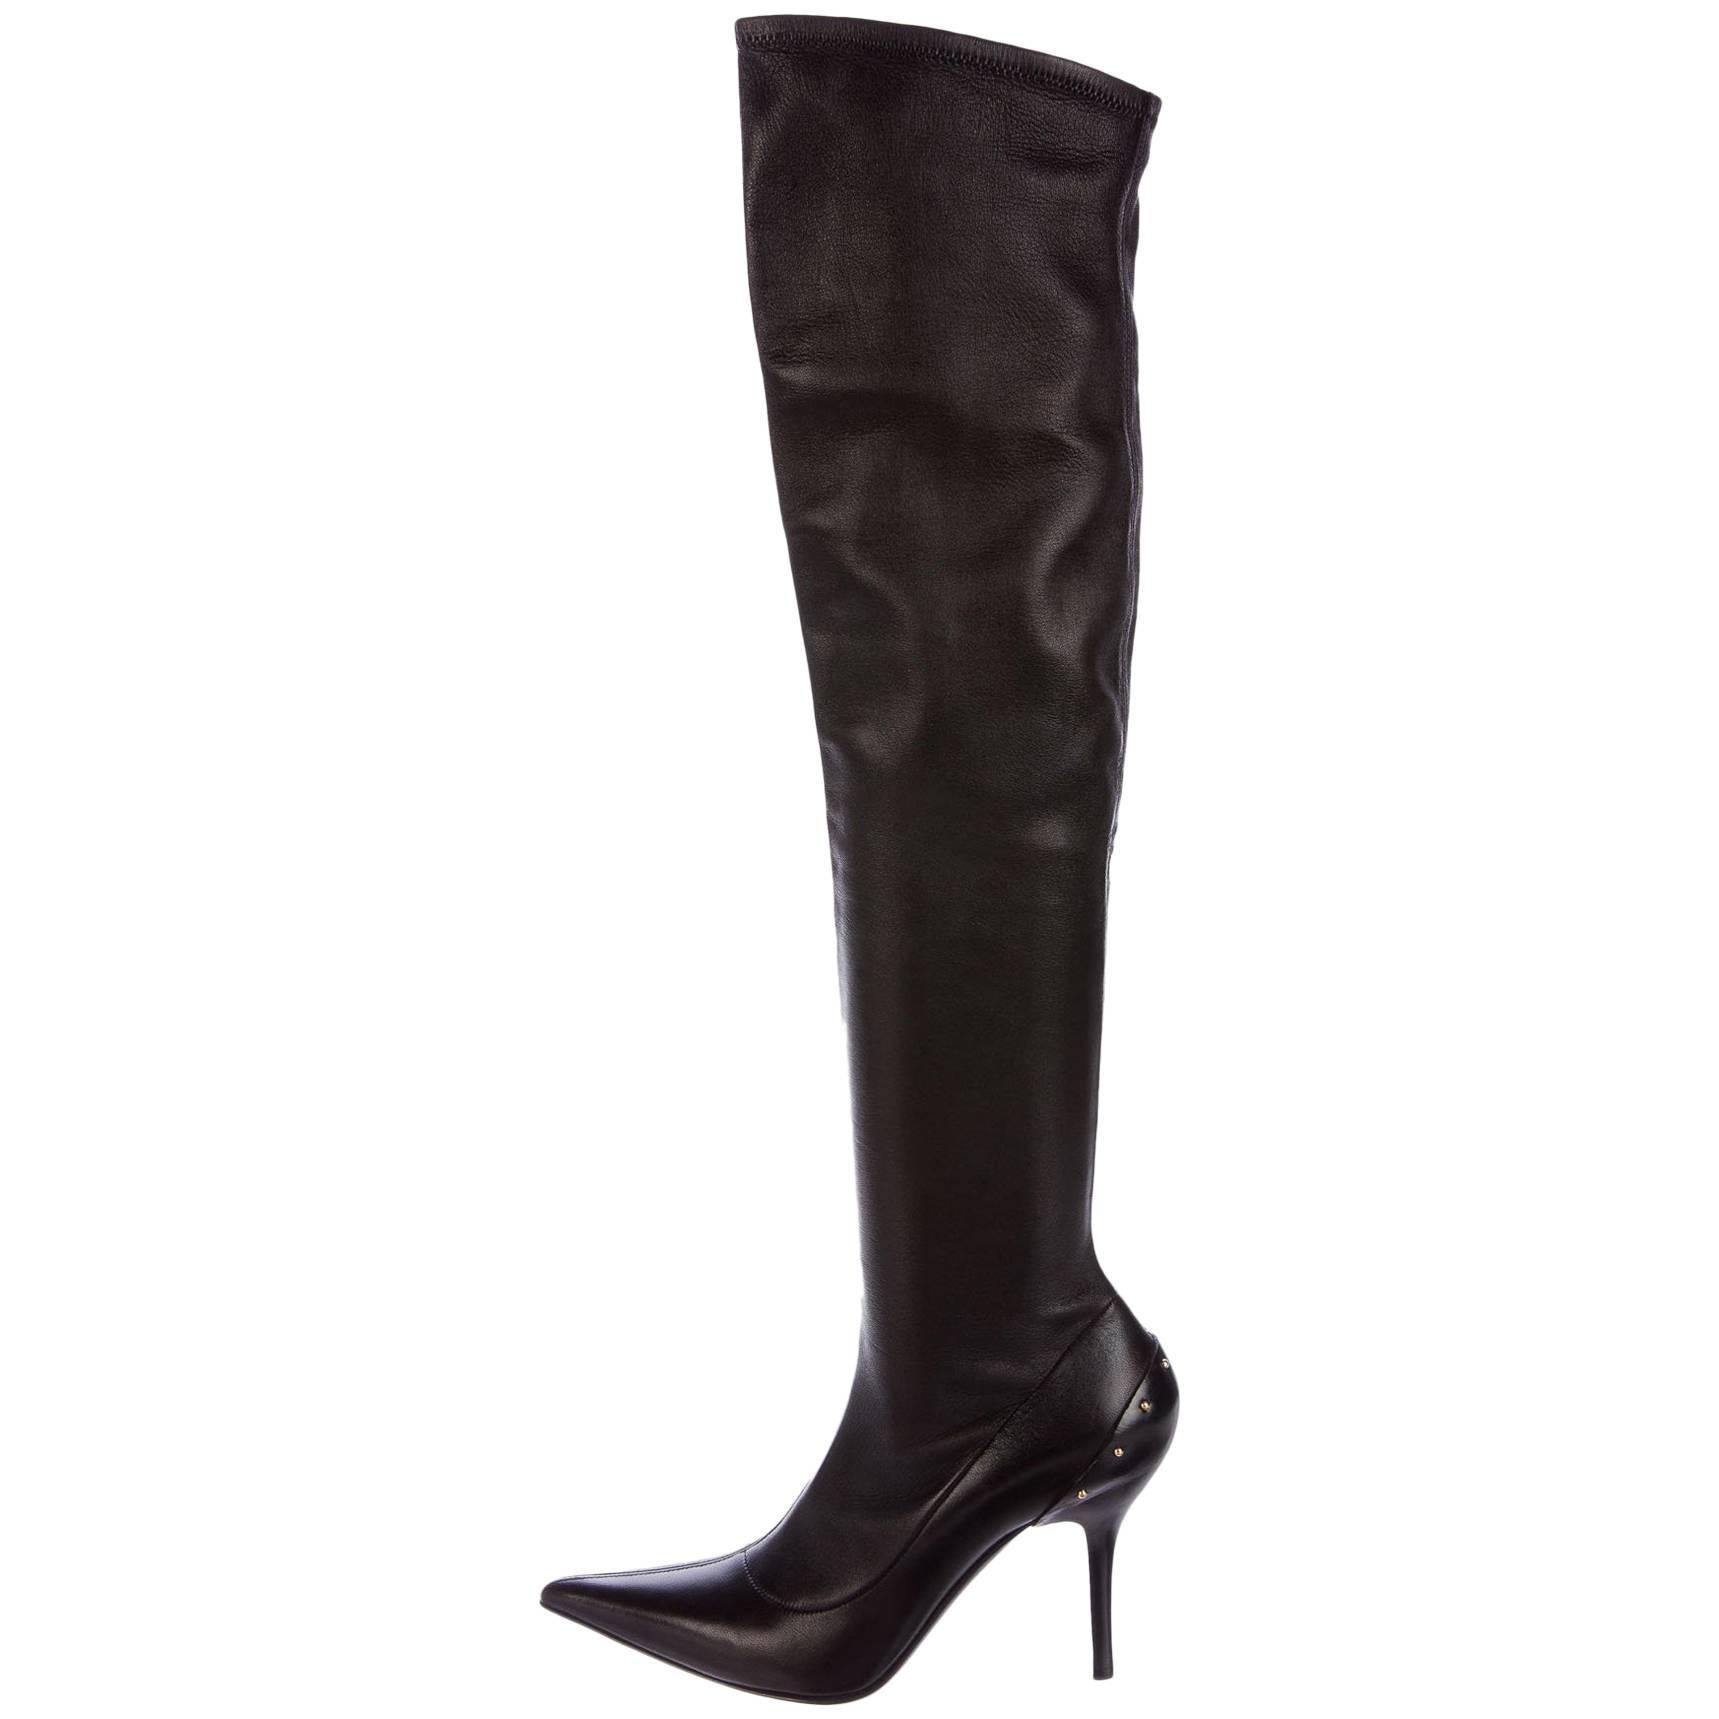 Tom Ford for Gucci F/W 2003 Over-the-Knee Stretch Leather Studded Boots 7.5/37.5 For Sale